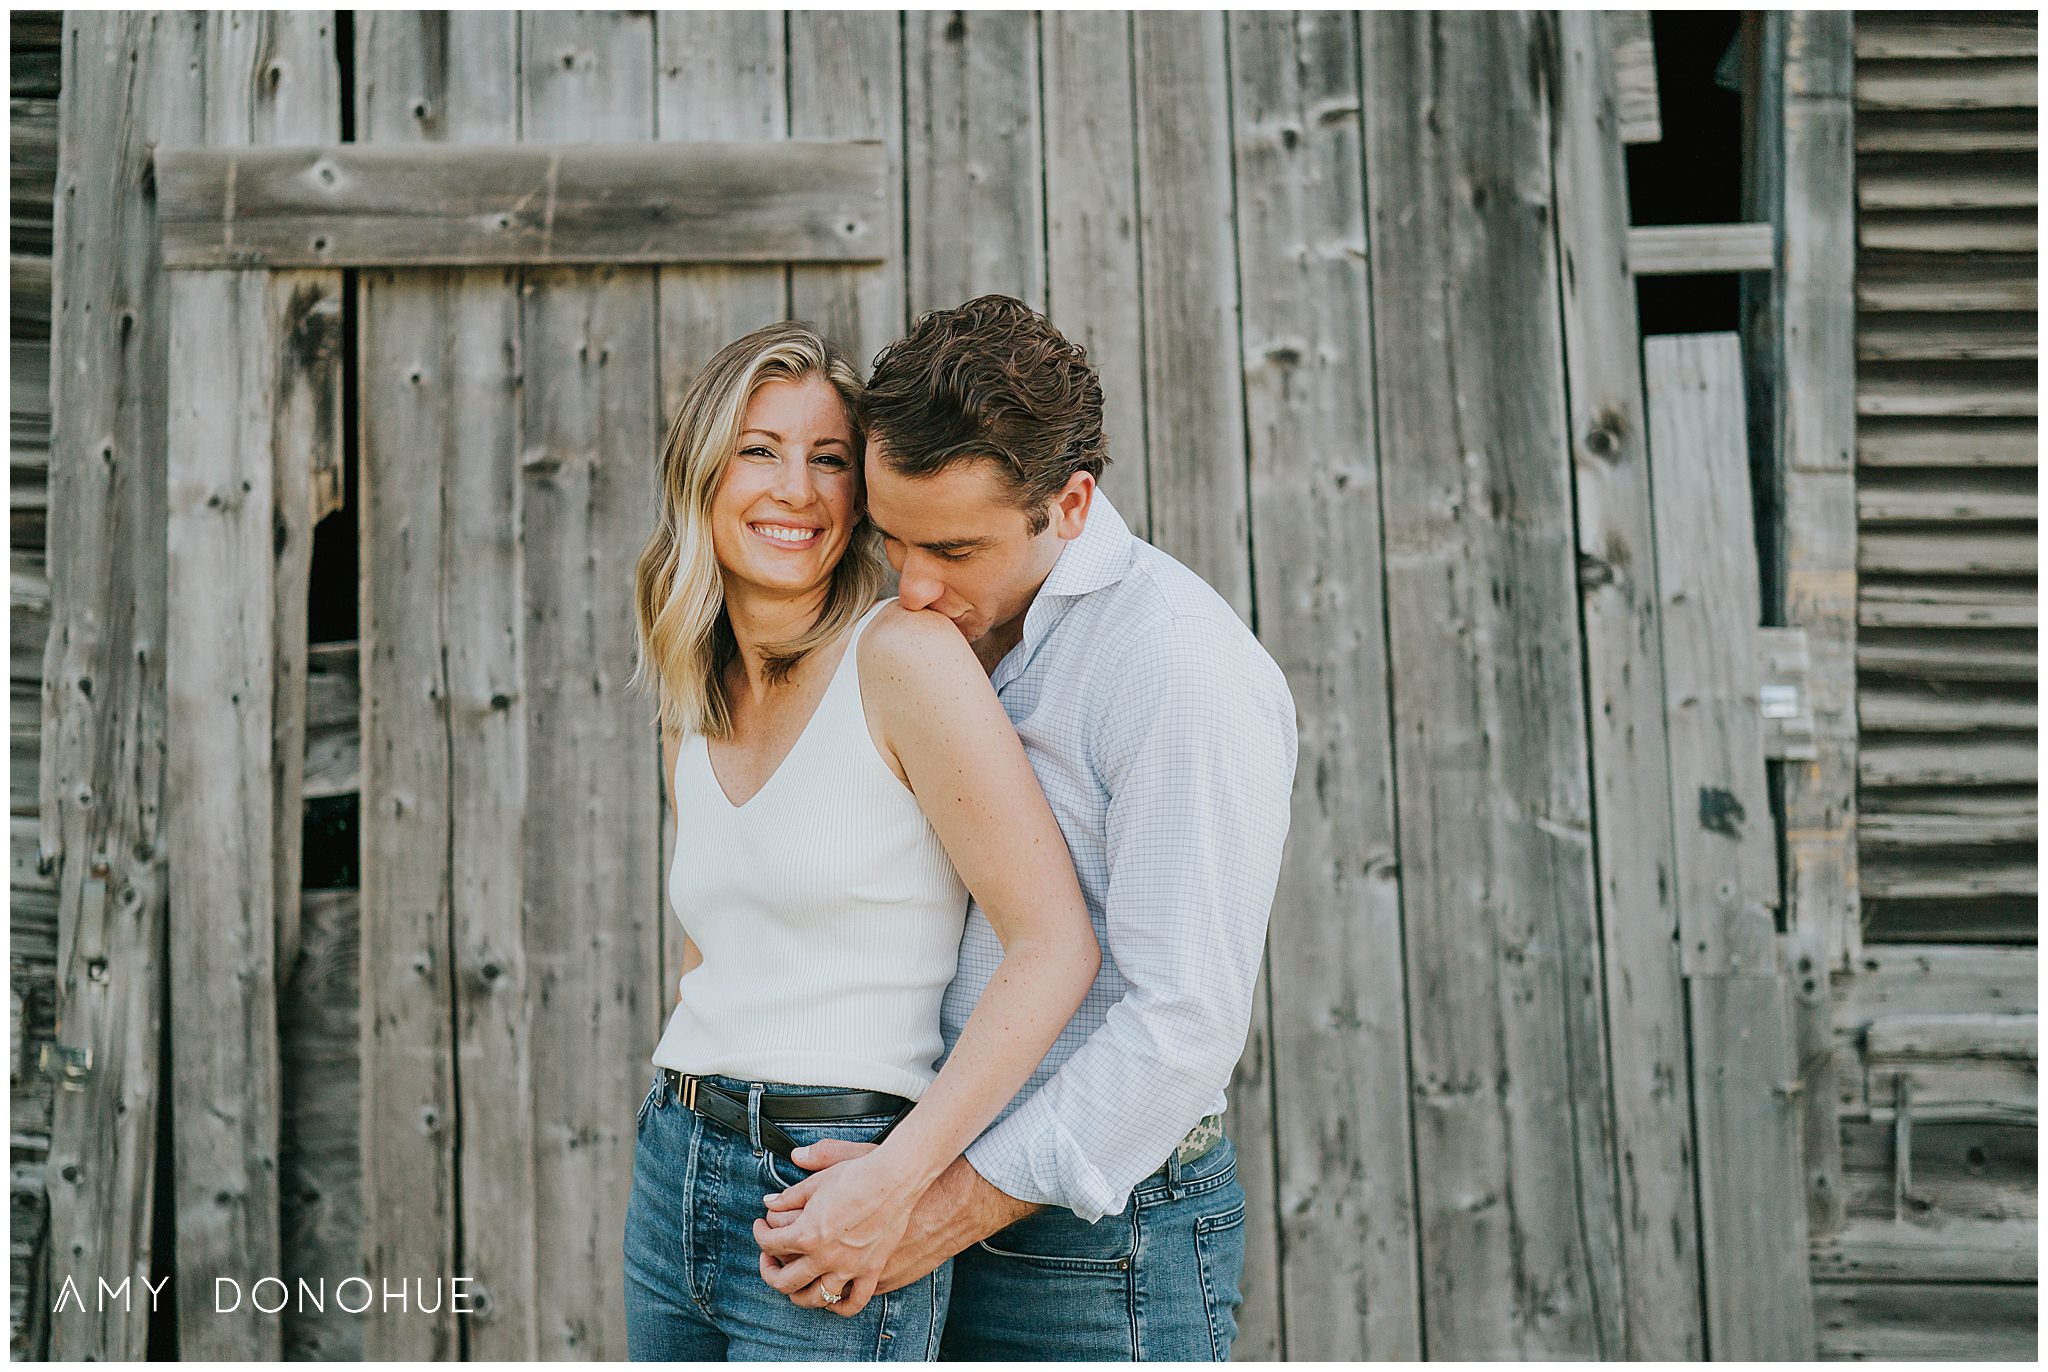 Vermont Engagement Photographer at Edson Hill | Amy Donohue Photography